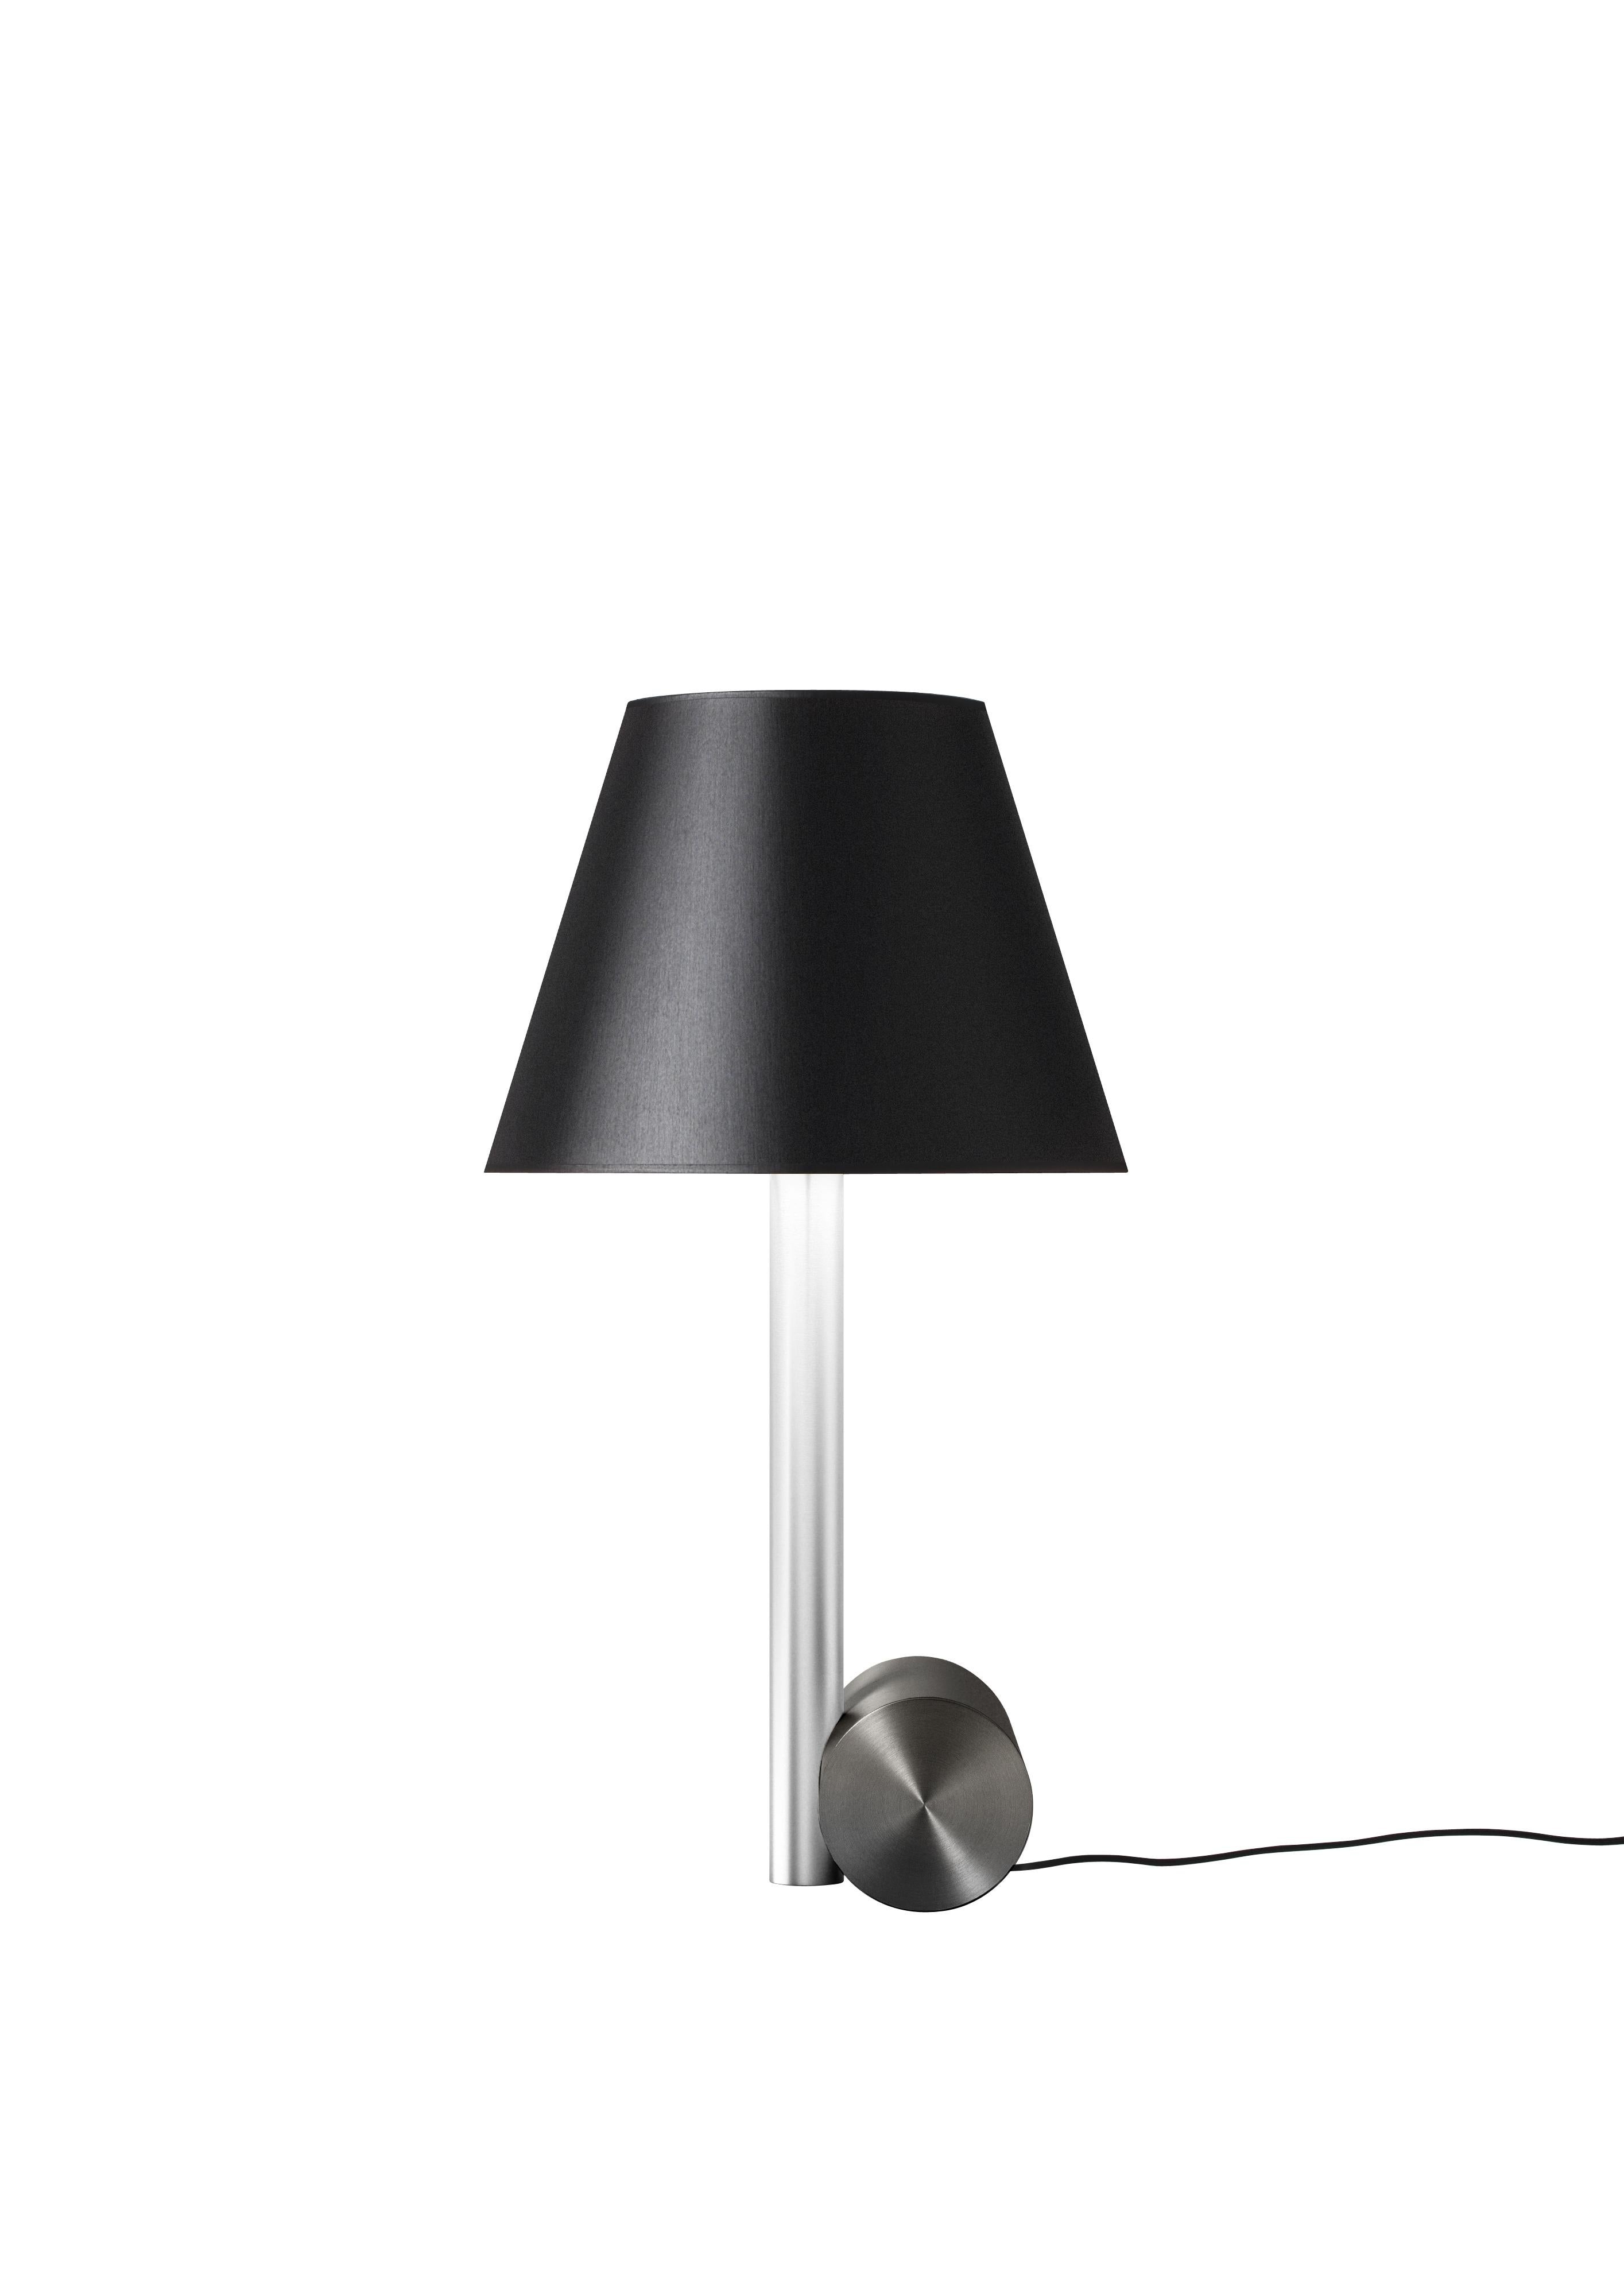 Calee XS table lamp by Pool
Dimensions: D22 X H42 cm
Materials: solid brass, polycarbonate, textile cable (2m).
Others finishes and dimensions are available.

All our lamps can be wired according to each country. If sold to the USA it will be